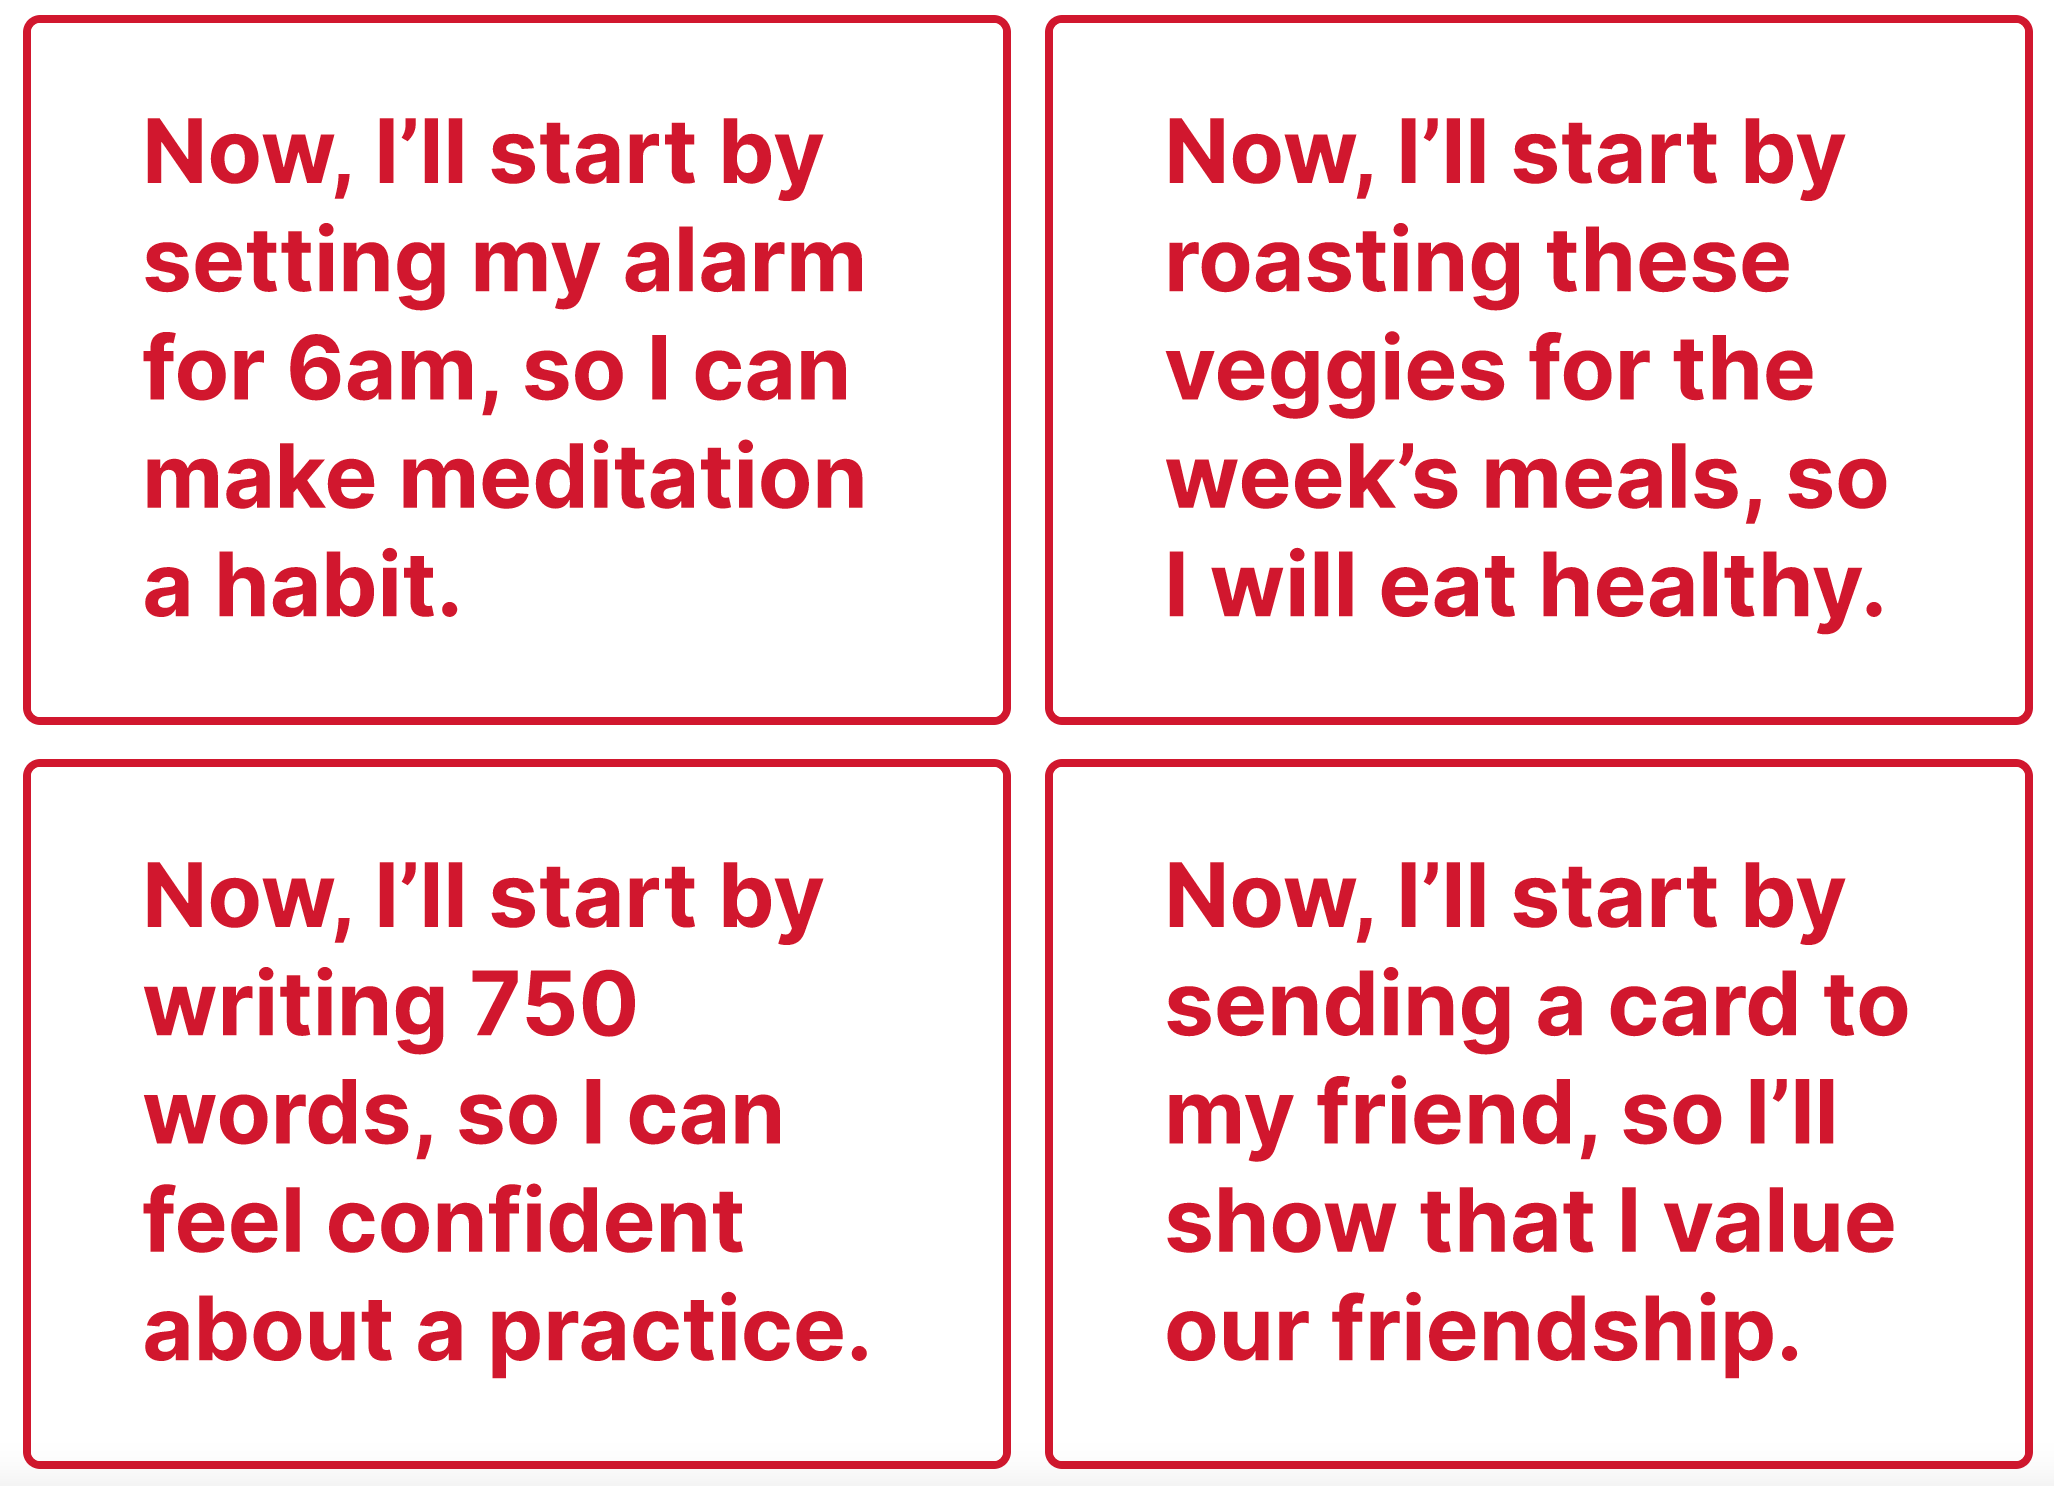 Four examples of commitment phrases for meditation, healthy eating, writing, and friendship.